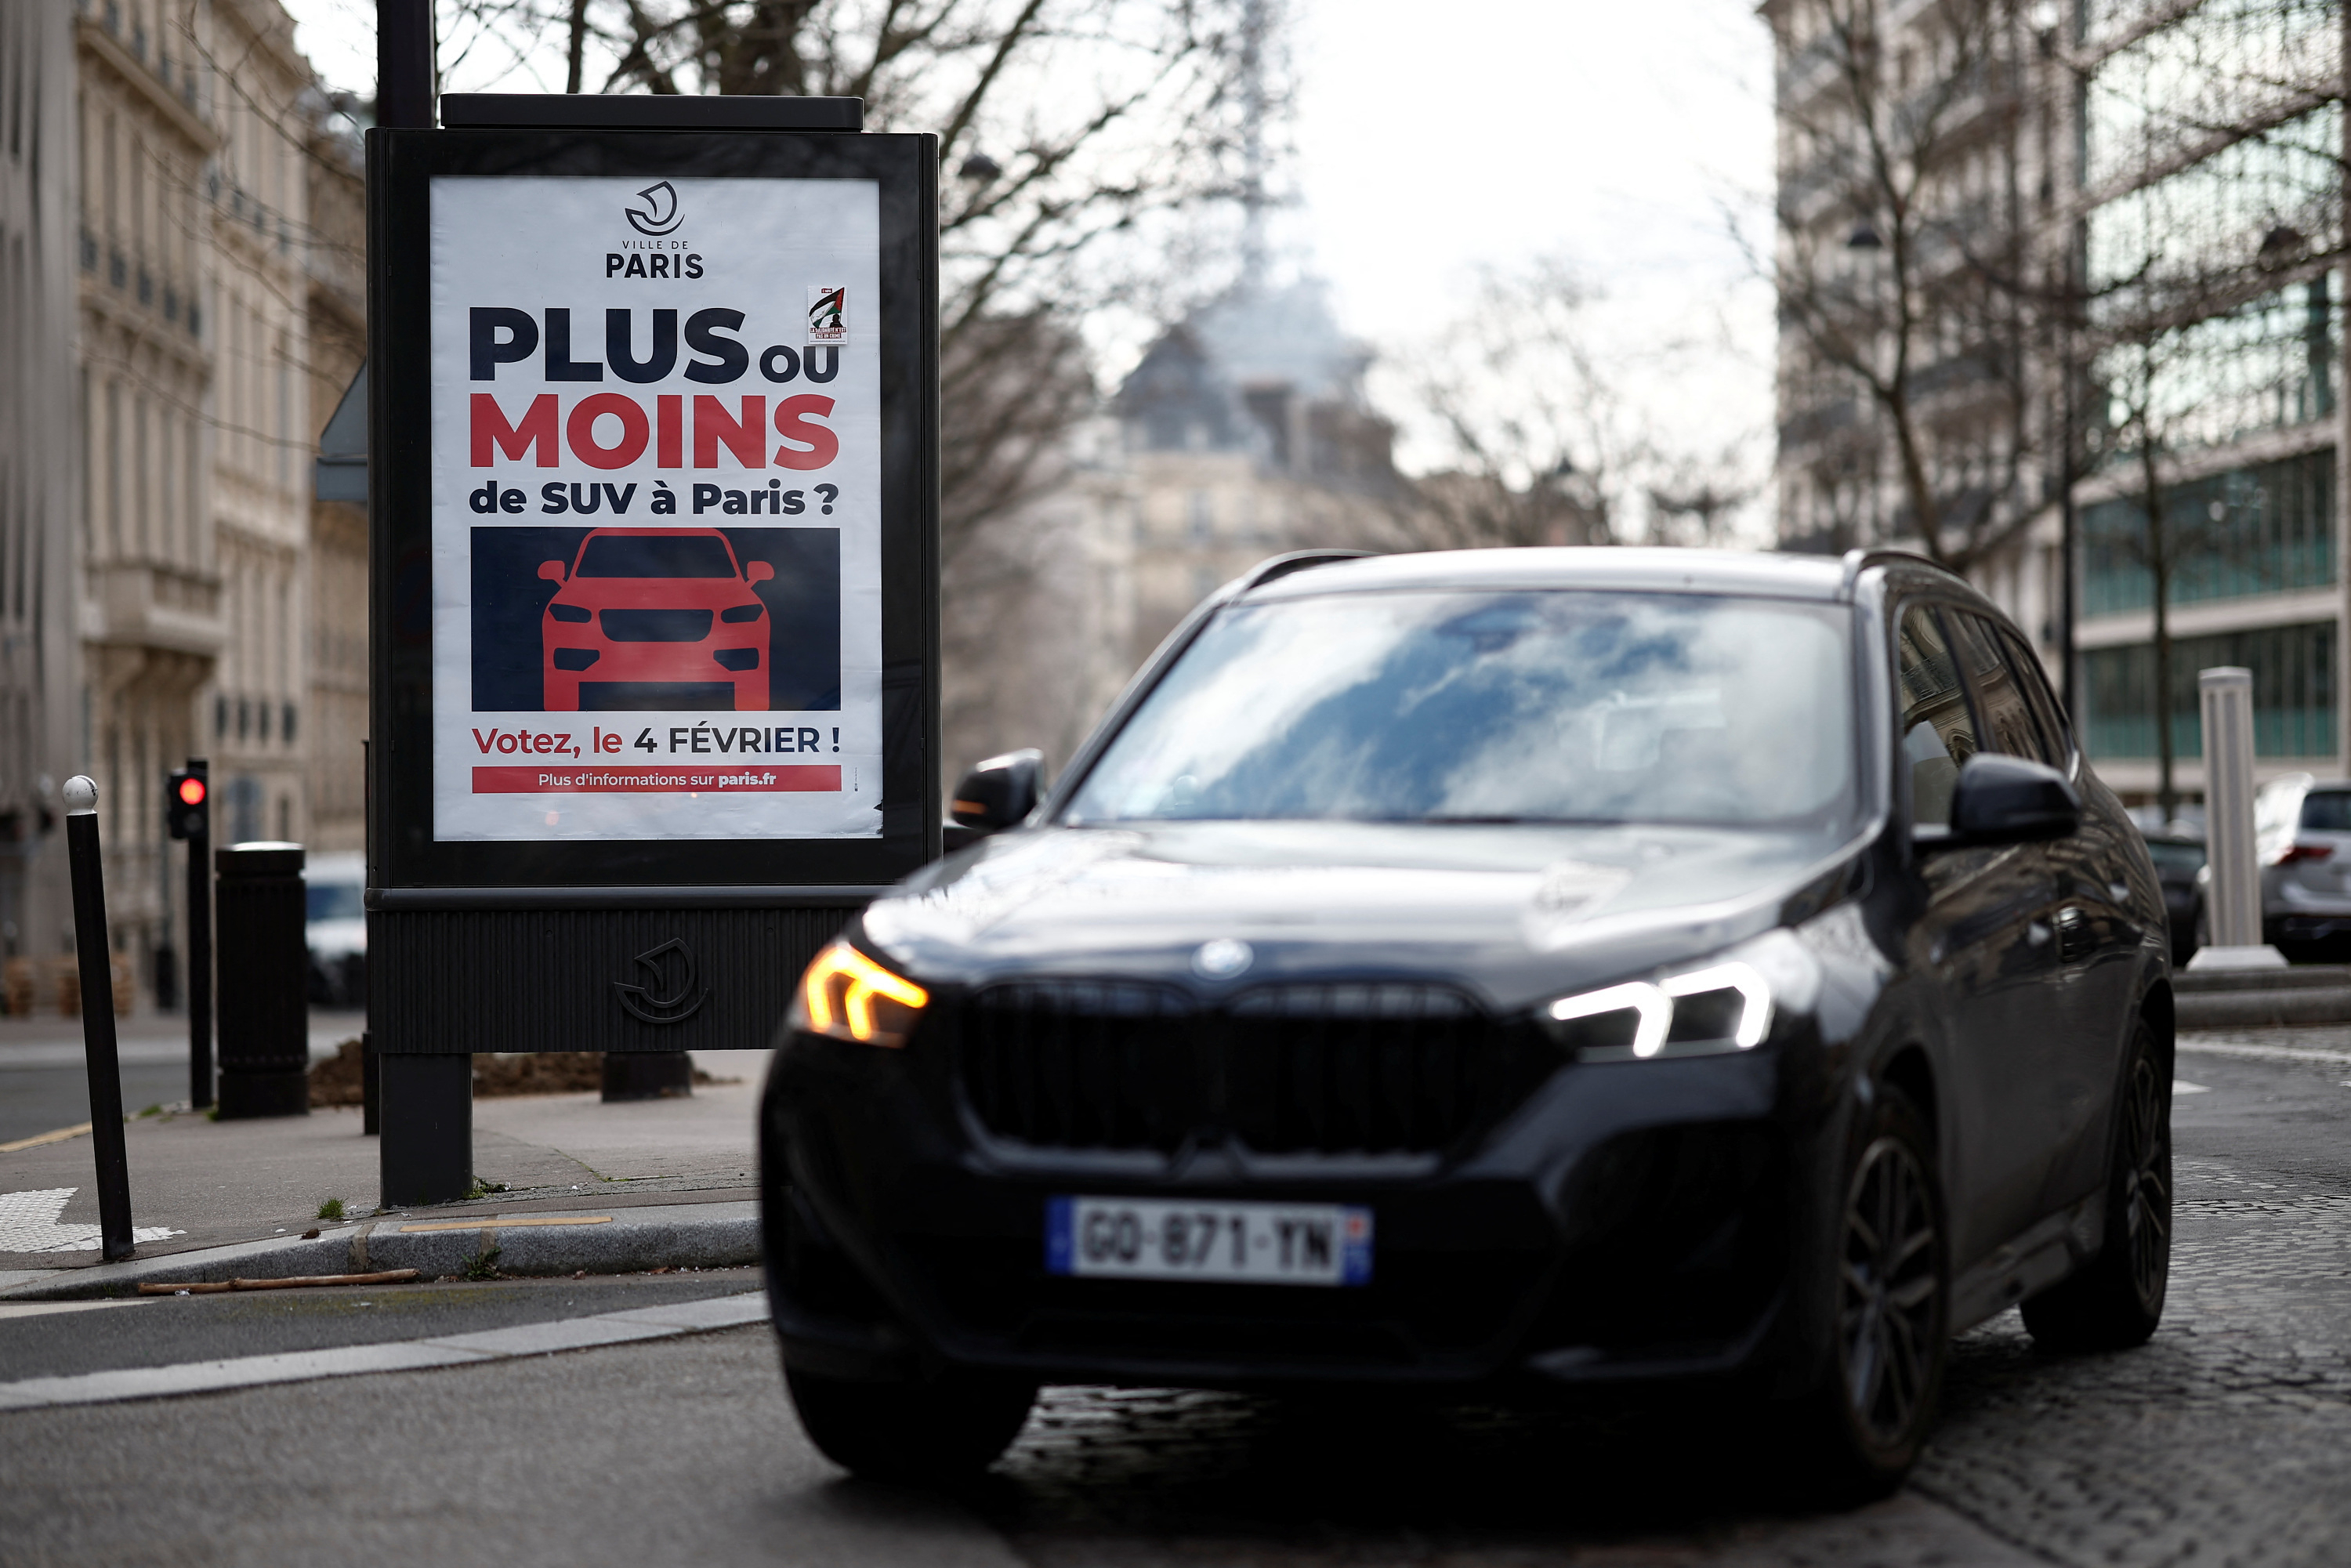 “Why not make the builders pay?” : Parisians divided over the anti-SUV policy